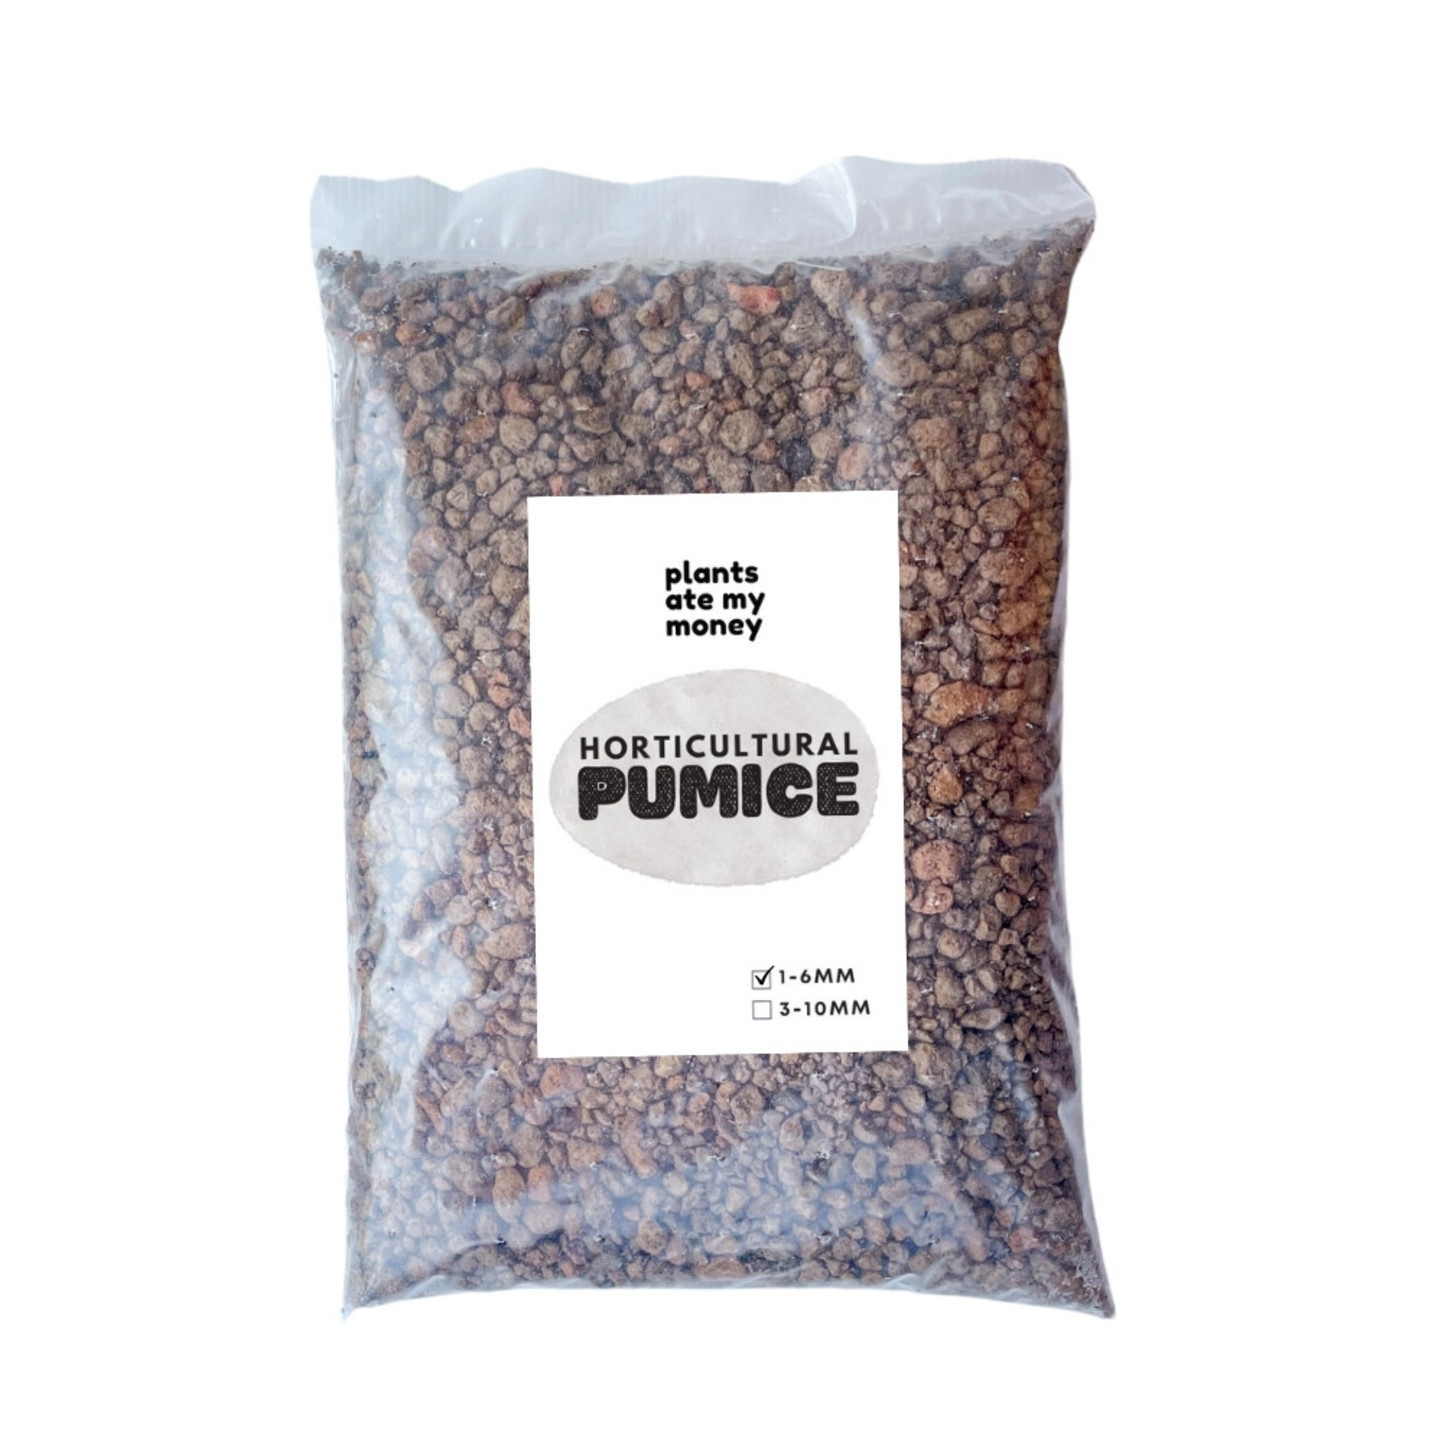 4 Litres - Pumice 1-6mm